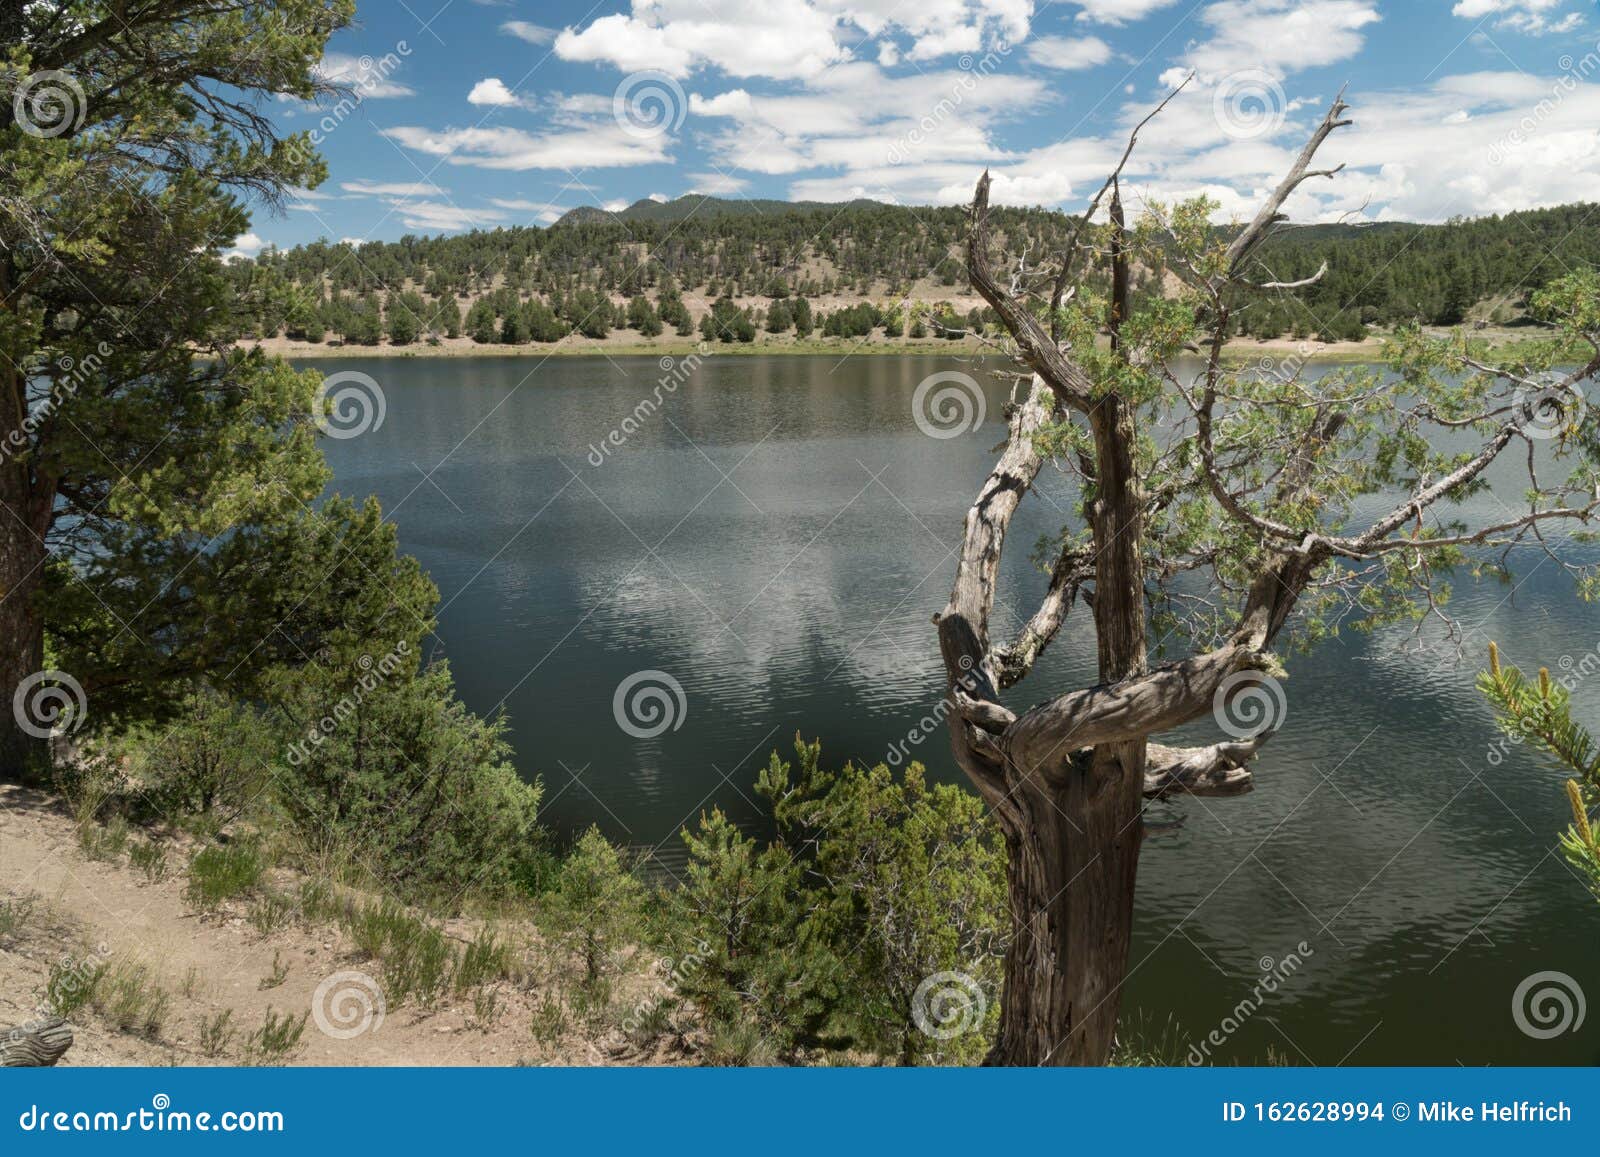 old and new trees along quemado lake, new mexico.